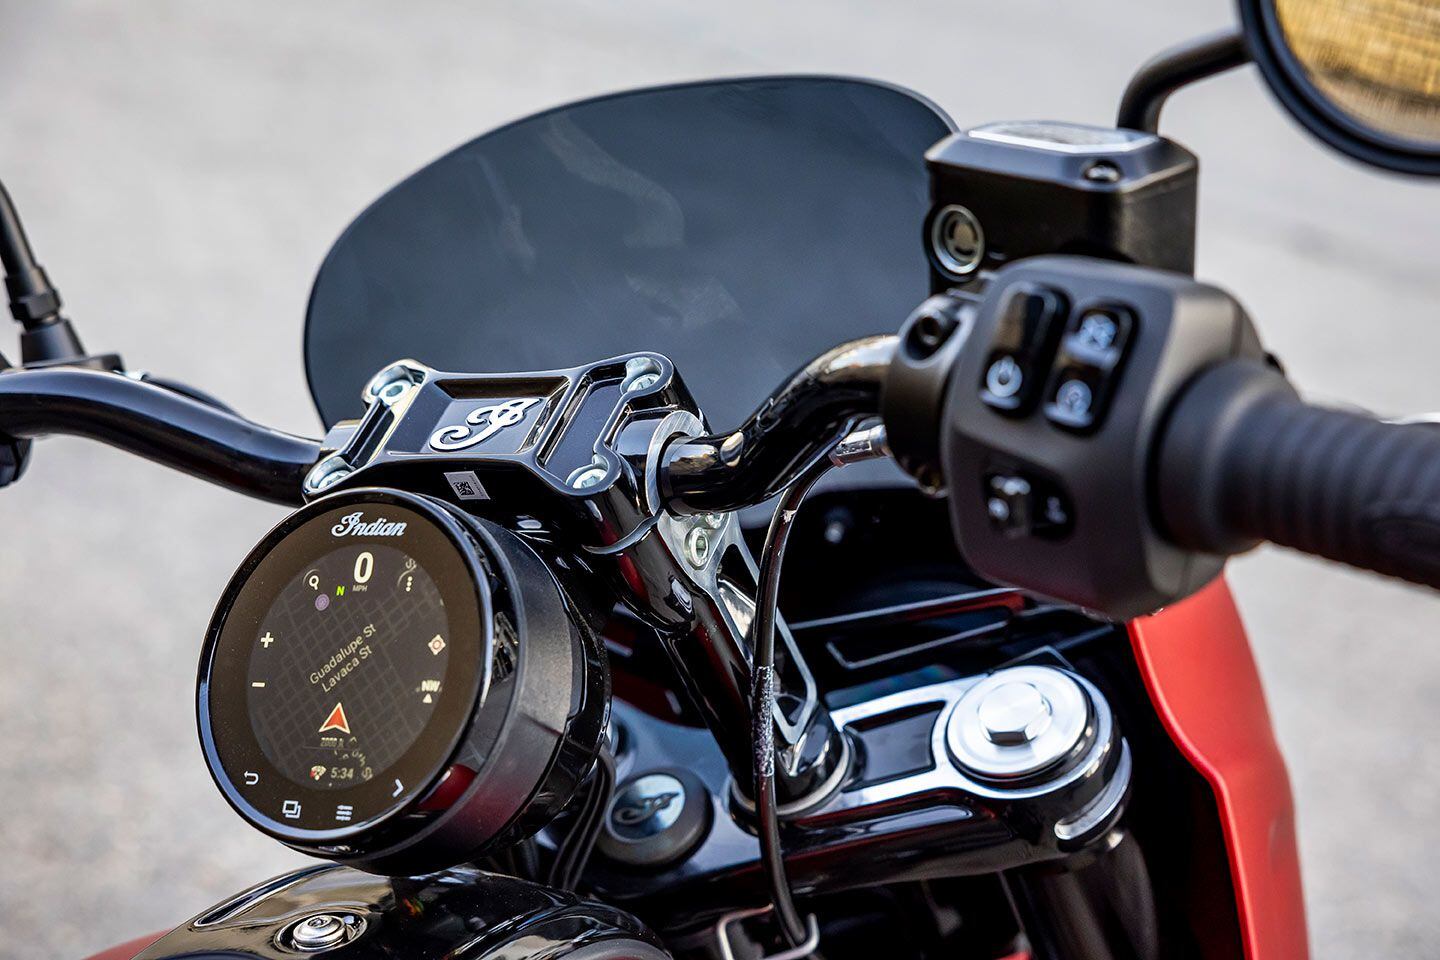 A 4-inch touchscreen display shows bike and ride information as well as turn-by-turn navigation when using Indian’s Ride Command system. Notice the 6-inch bar risers that come standard on the Sport Chief.